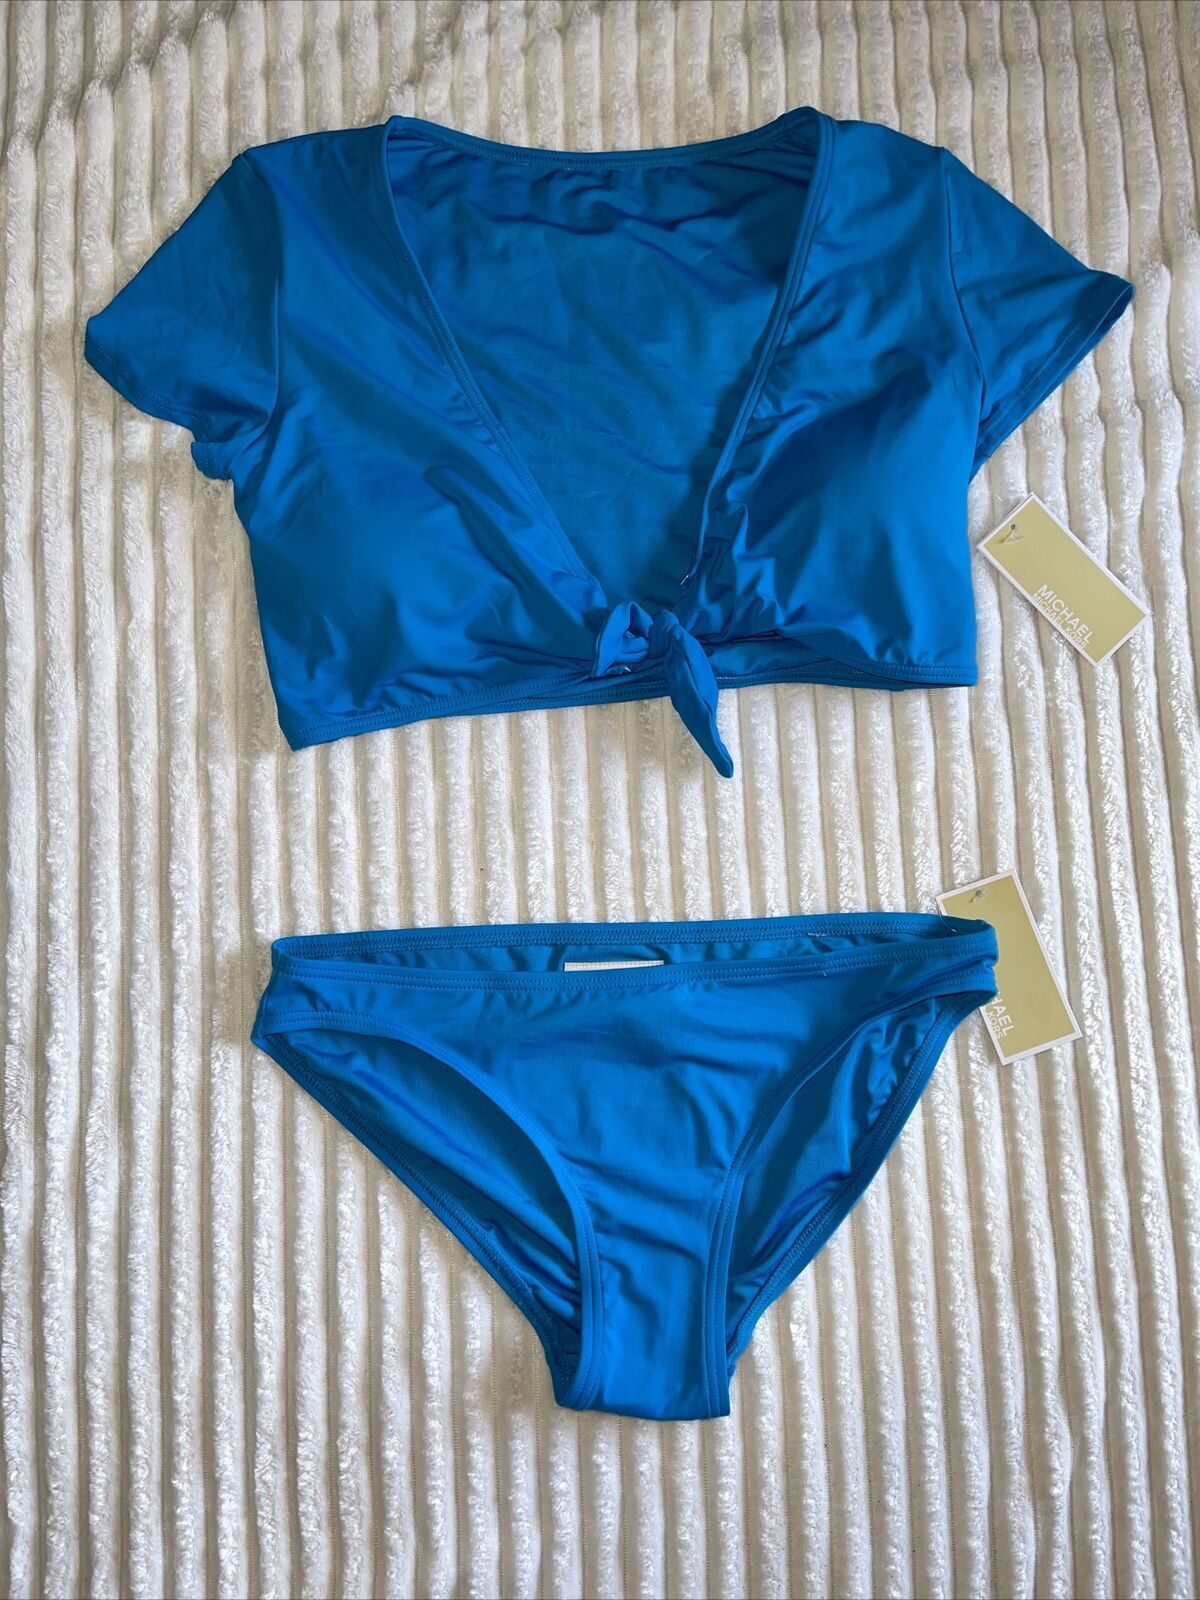 Primary image for Michael Kors 2 Piece Halter Bikini Swimsuit Turquoise Size Small NEW